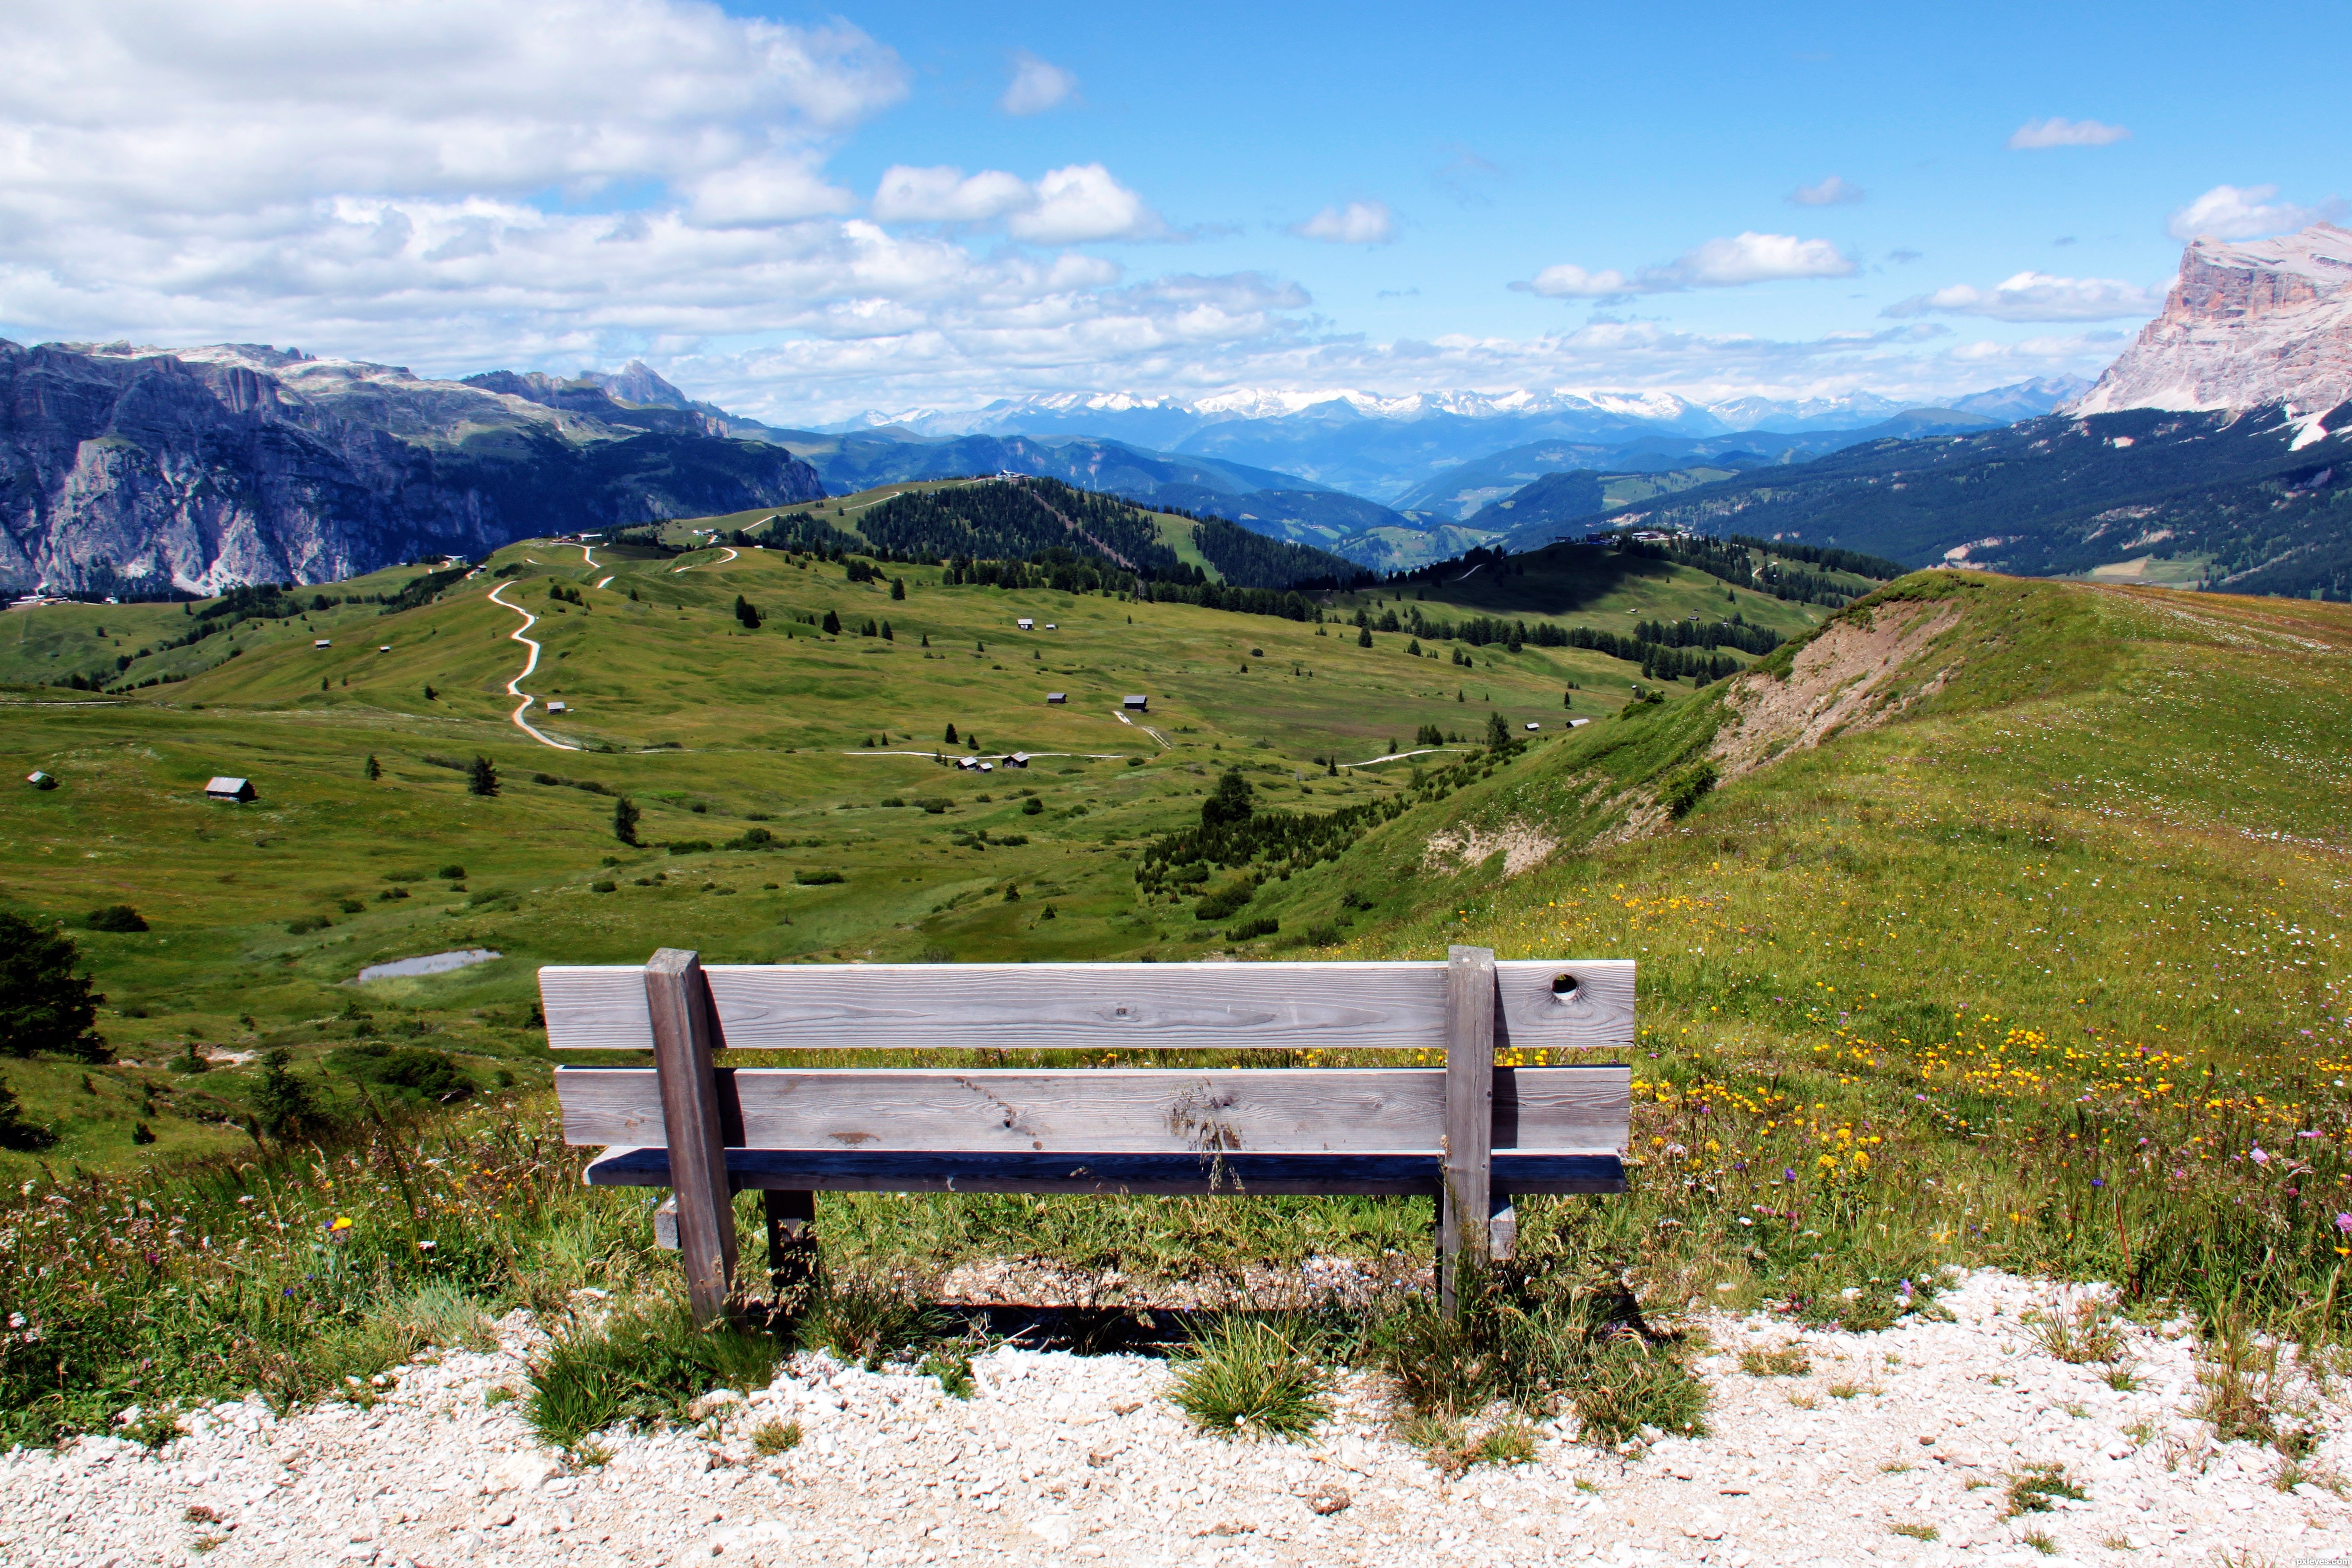 Enjoy the landscape picture, by patty for: park bench photography ...